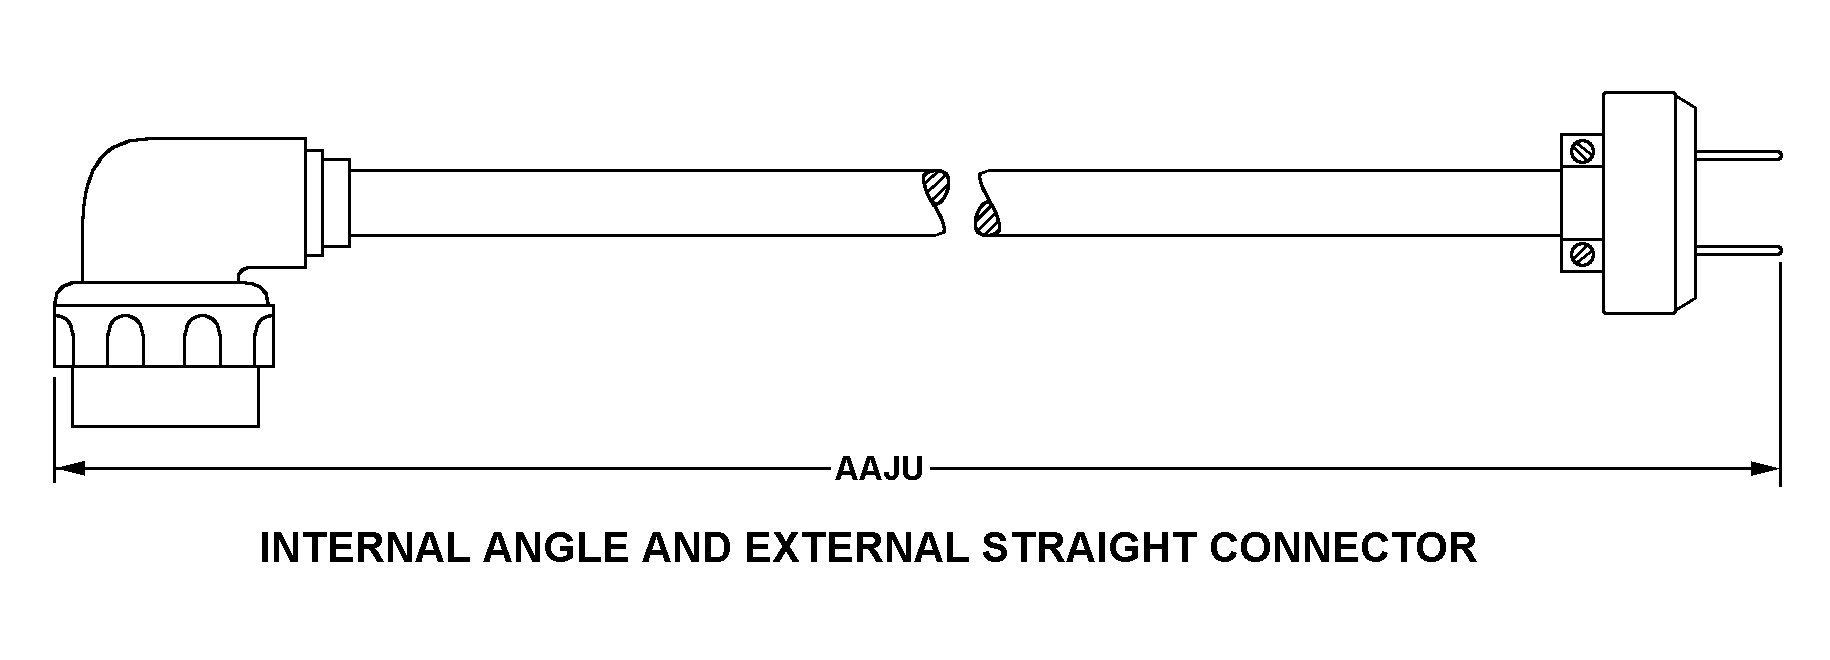 INTERNAL ANGLE AND EXTERNAL STRAIGHT CONNECTOR style nsn 5995-01-319-3059